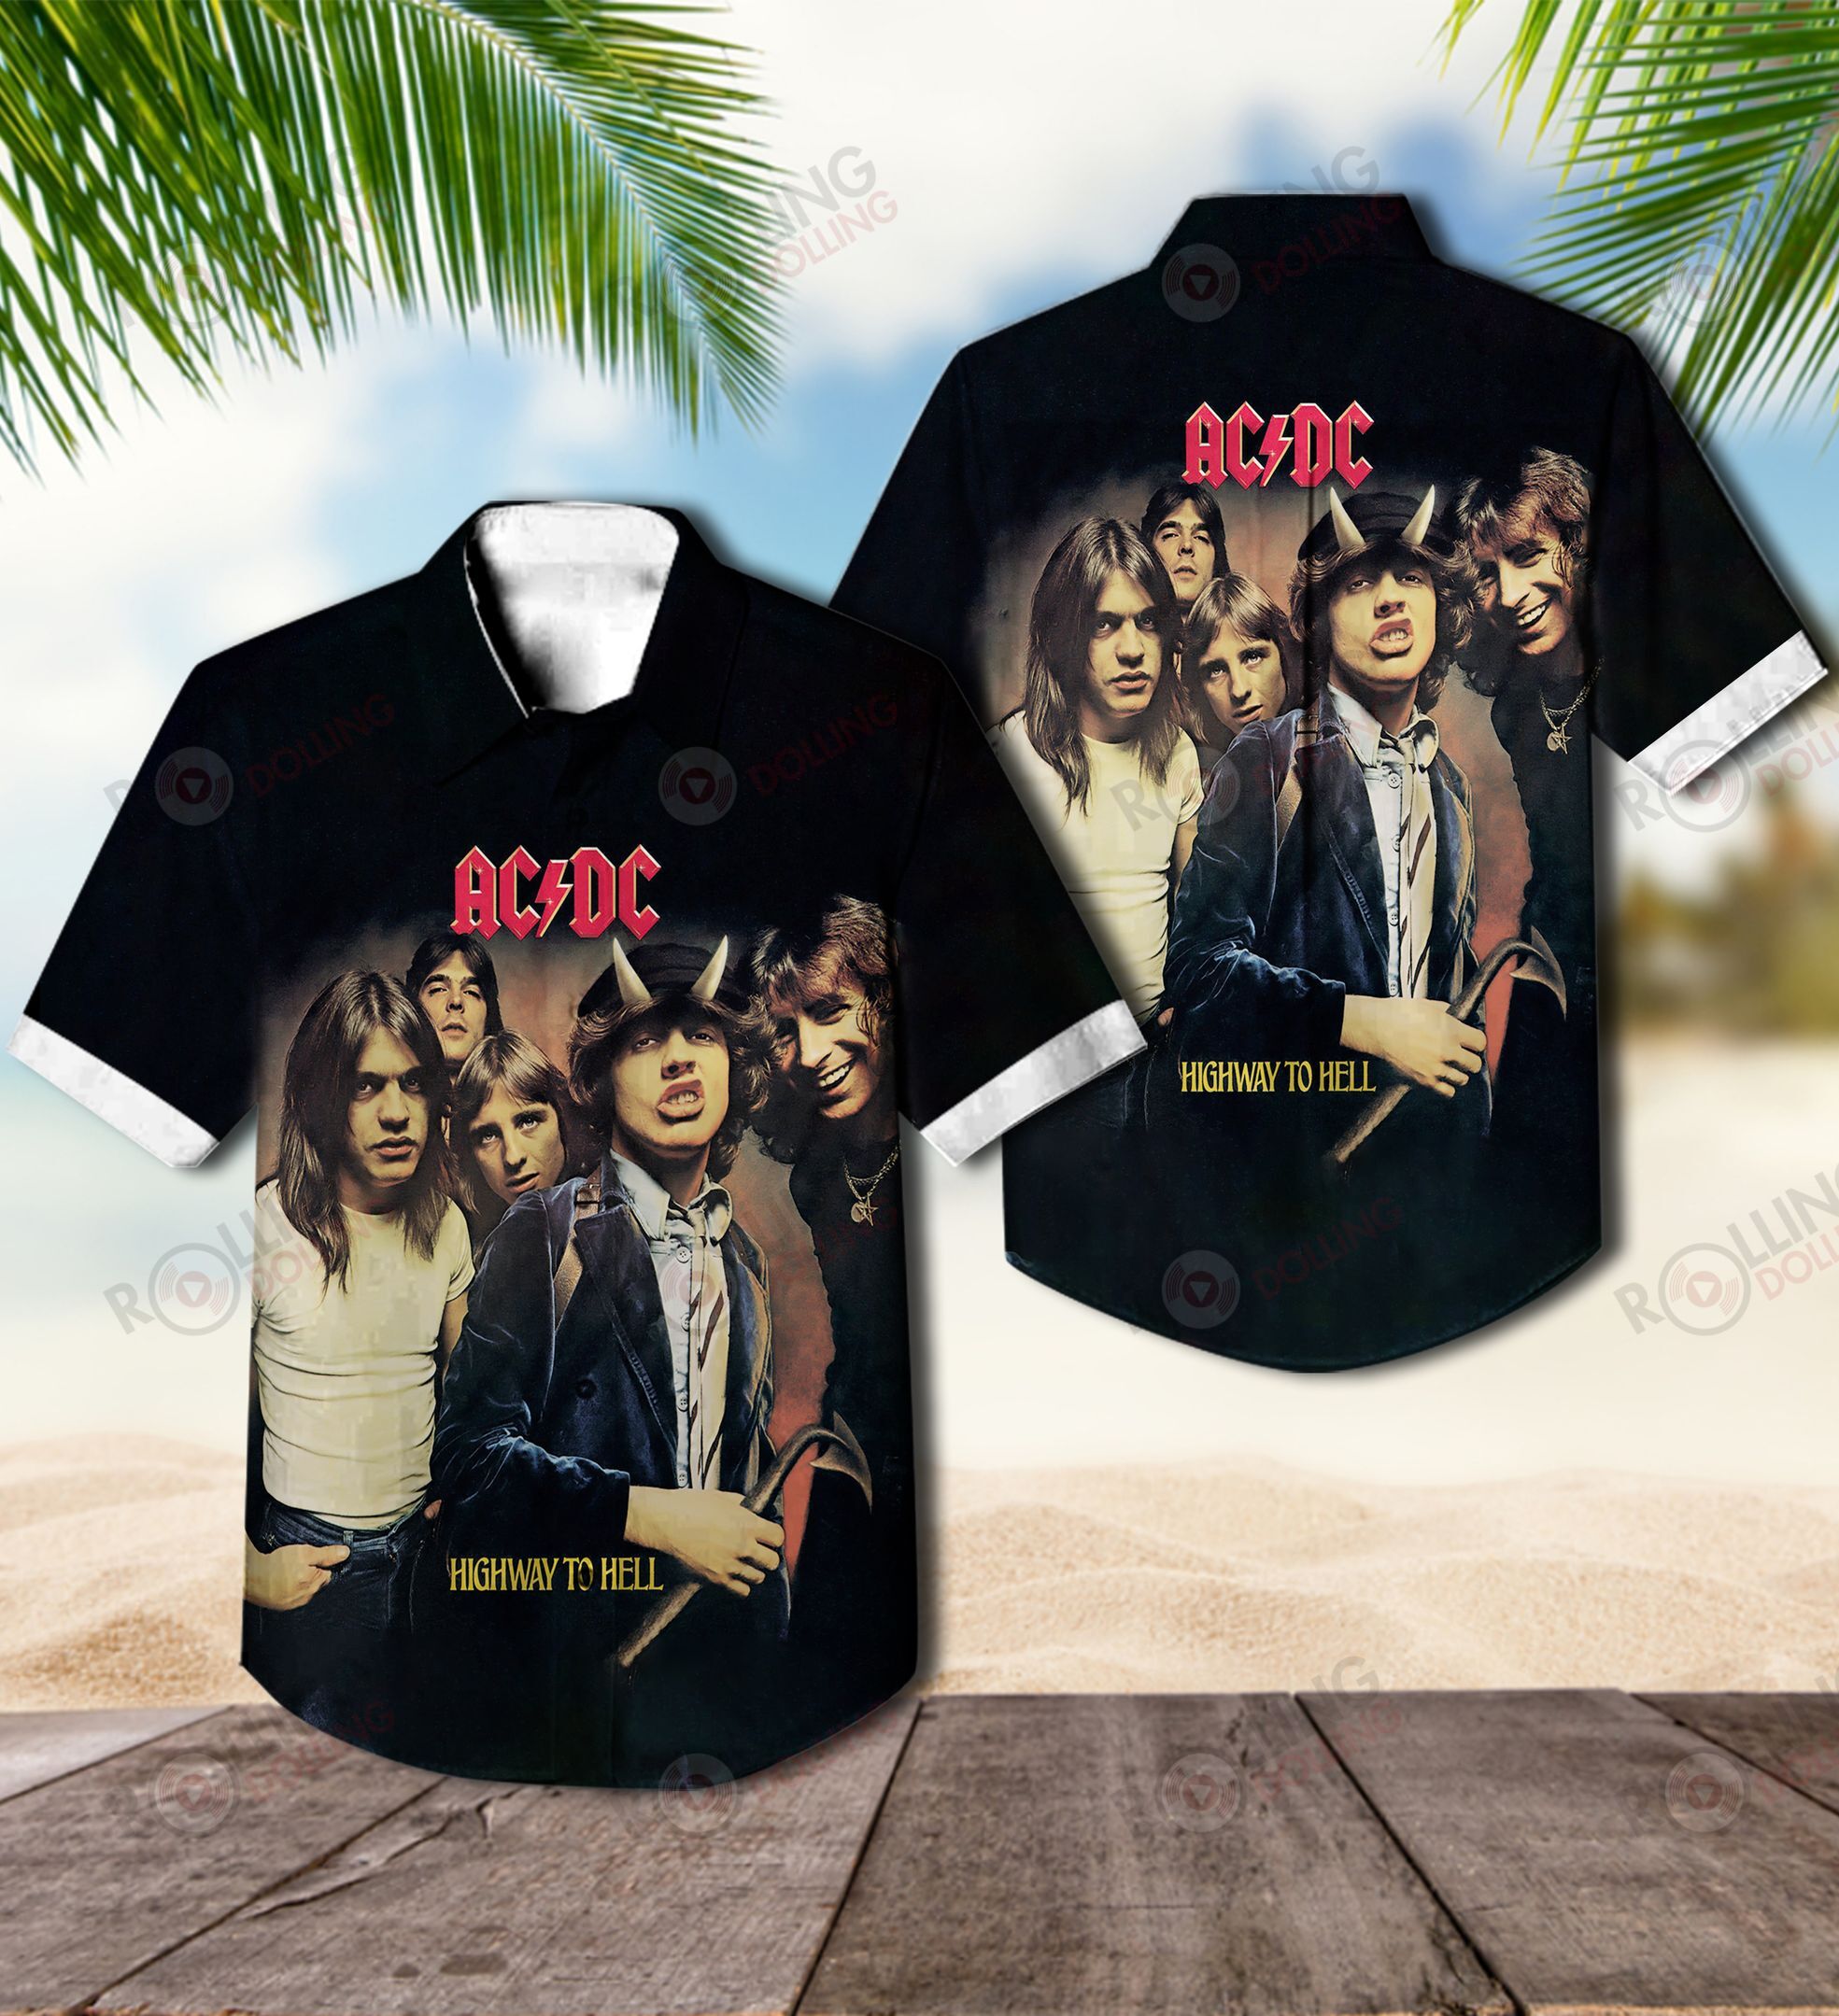 The Hawaiian Shirt is a popular shirt that is worn by Rock band fans 23